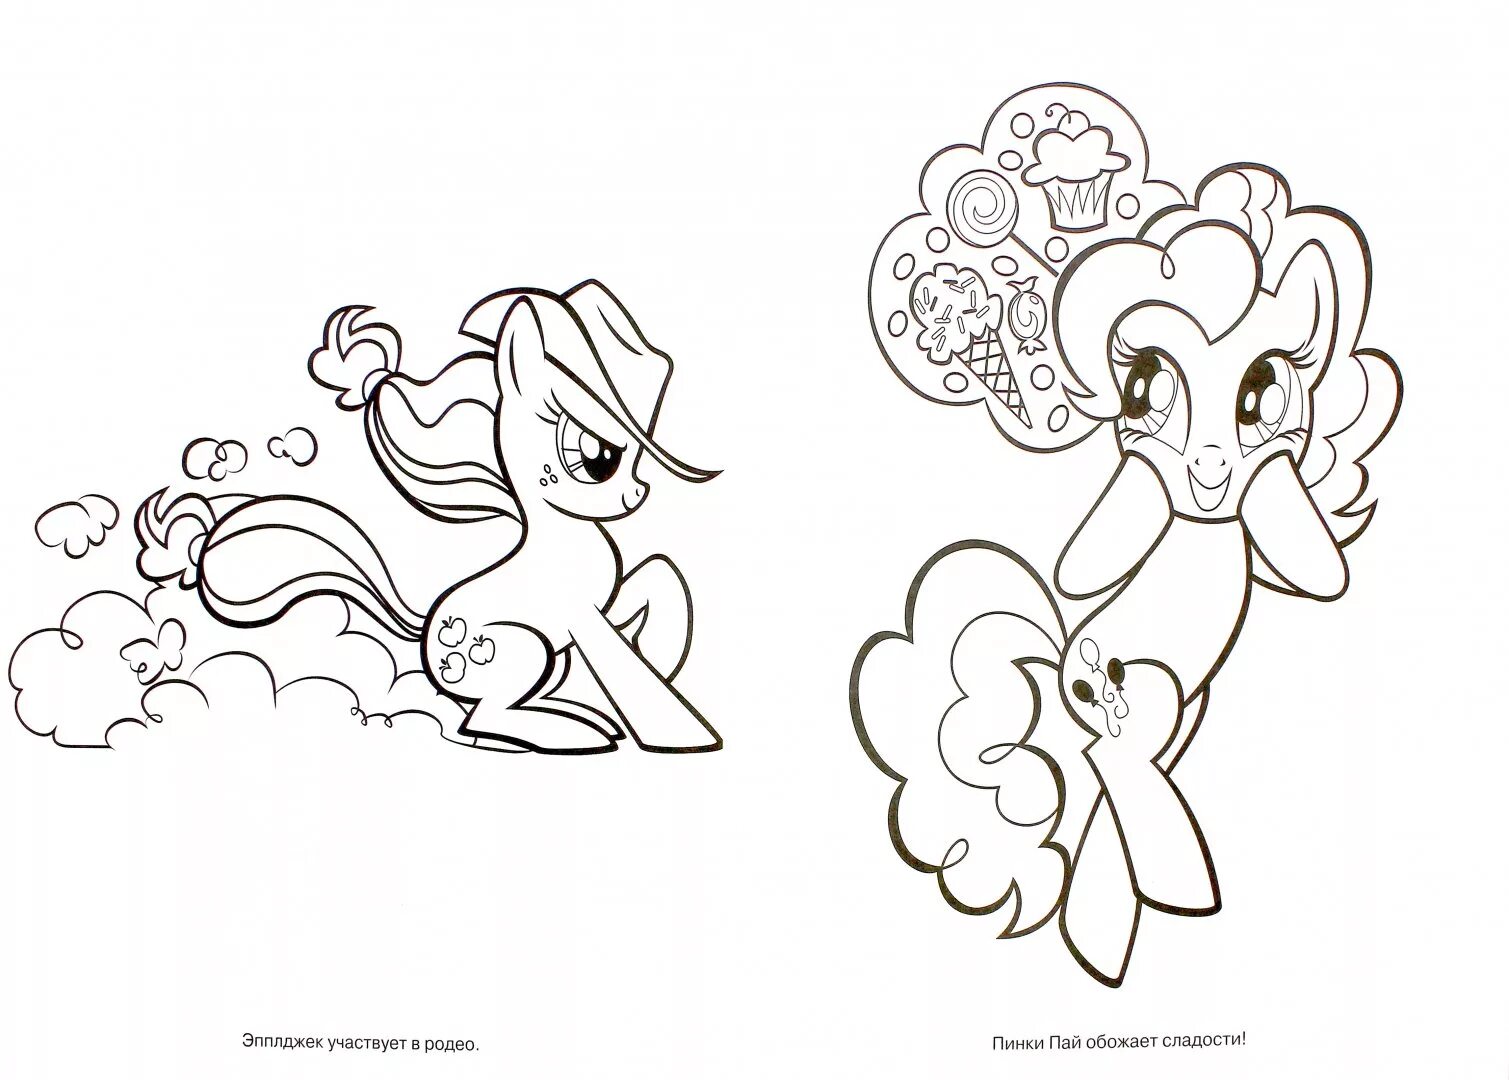 Splendorous coloring page pony magical